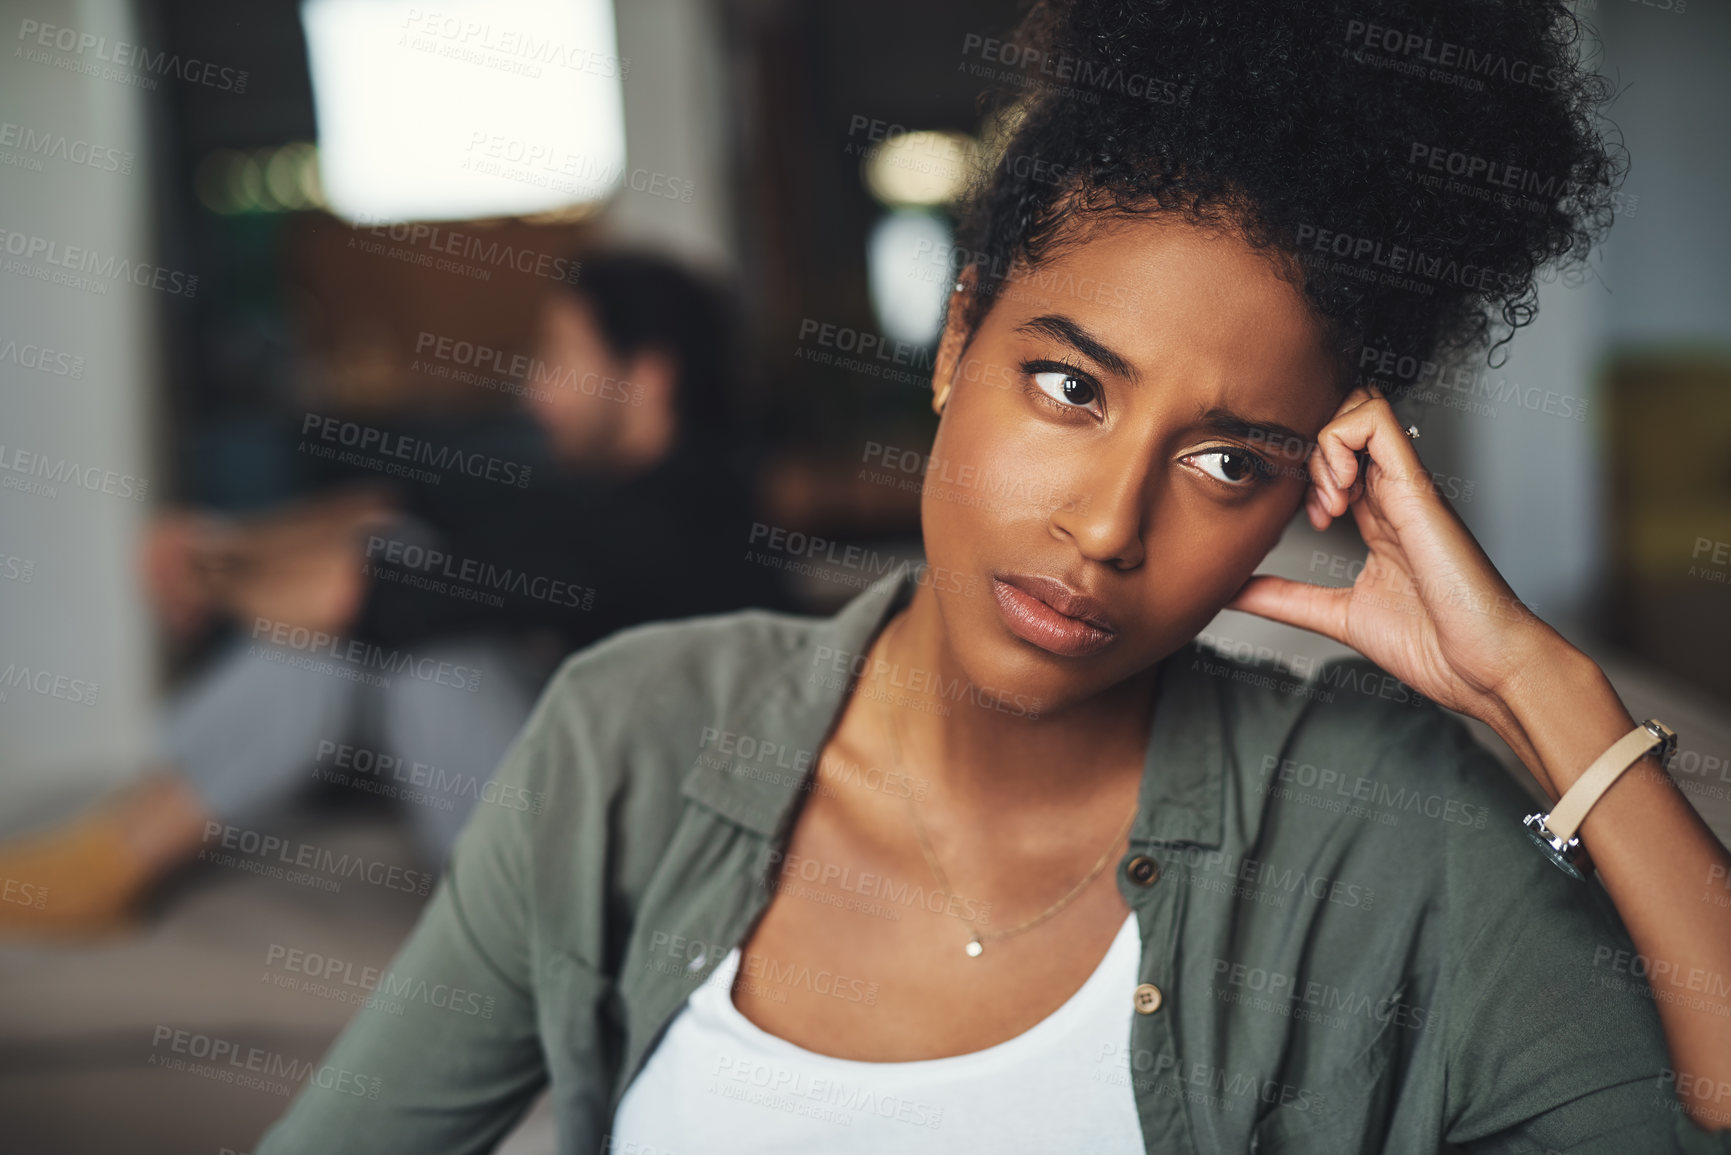 Buy stock photo Shot of an attractive young woman looking upset while her boyfriend sits in the background at home